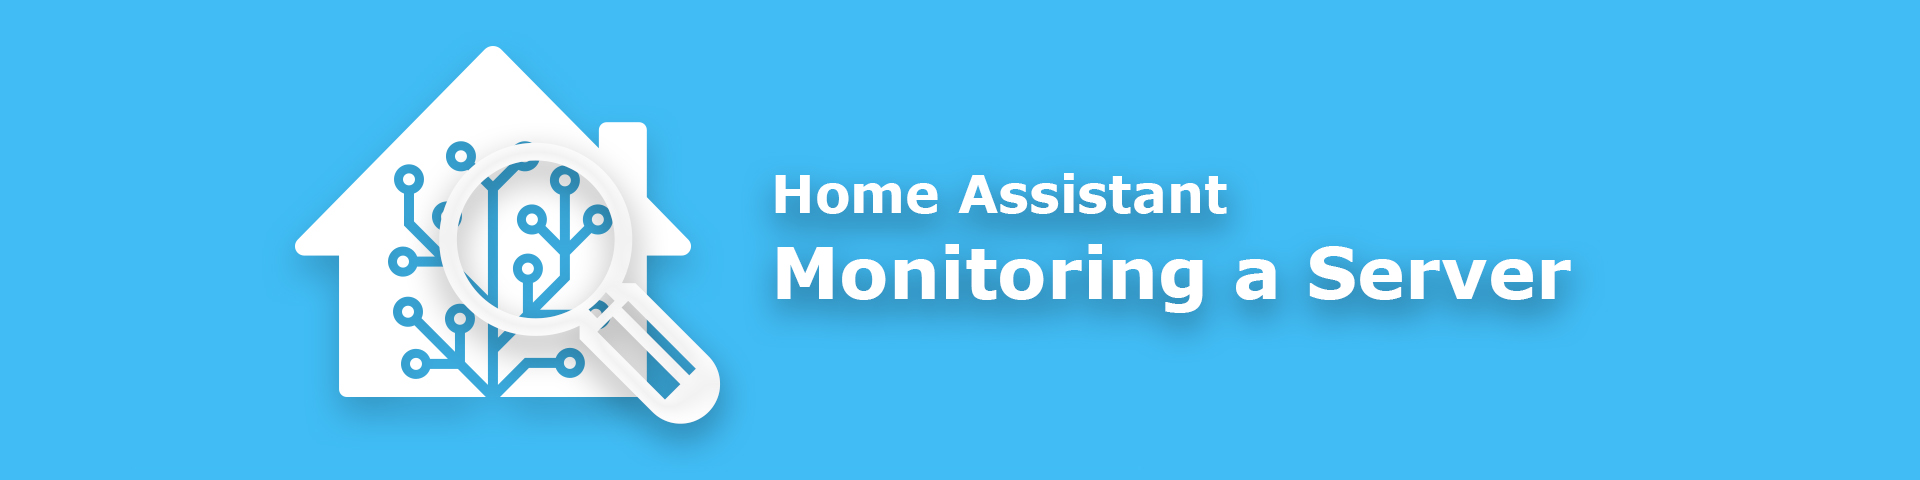 Monitoring a Home Assistant server